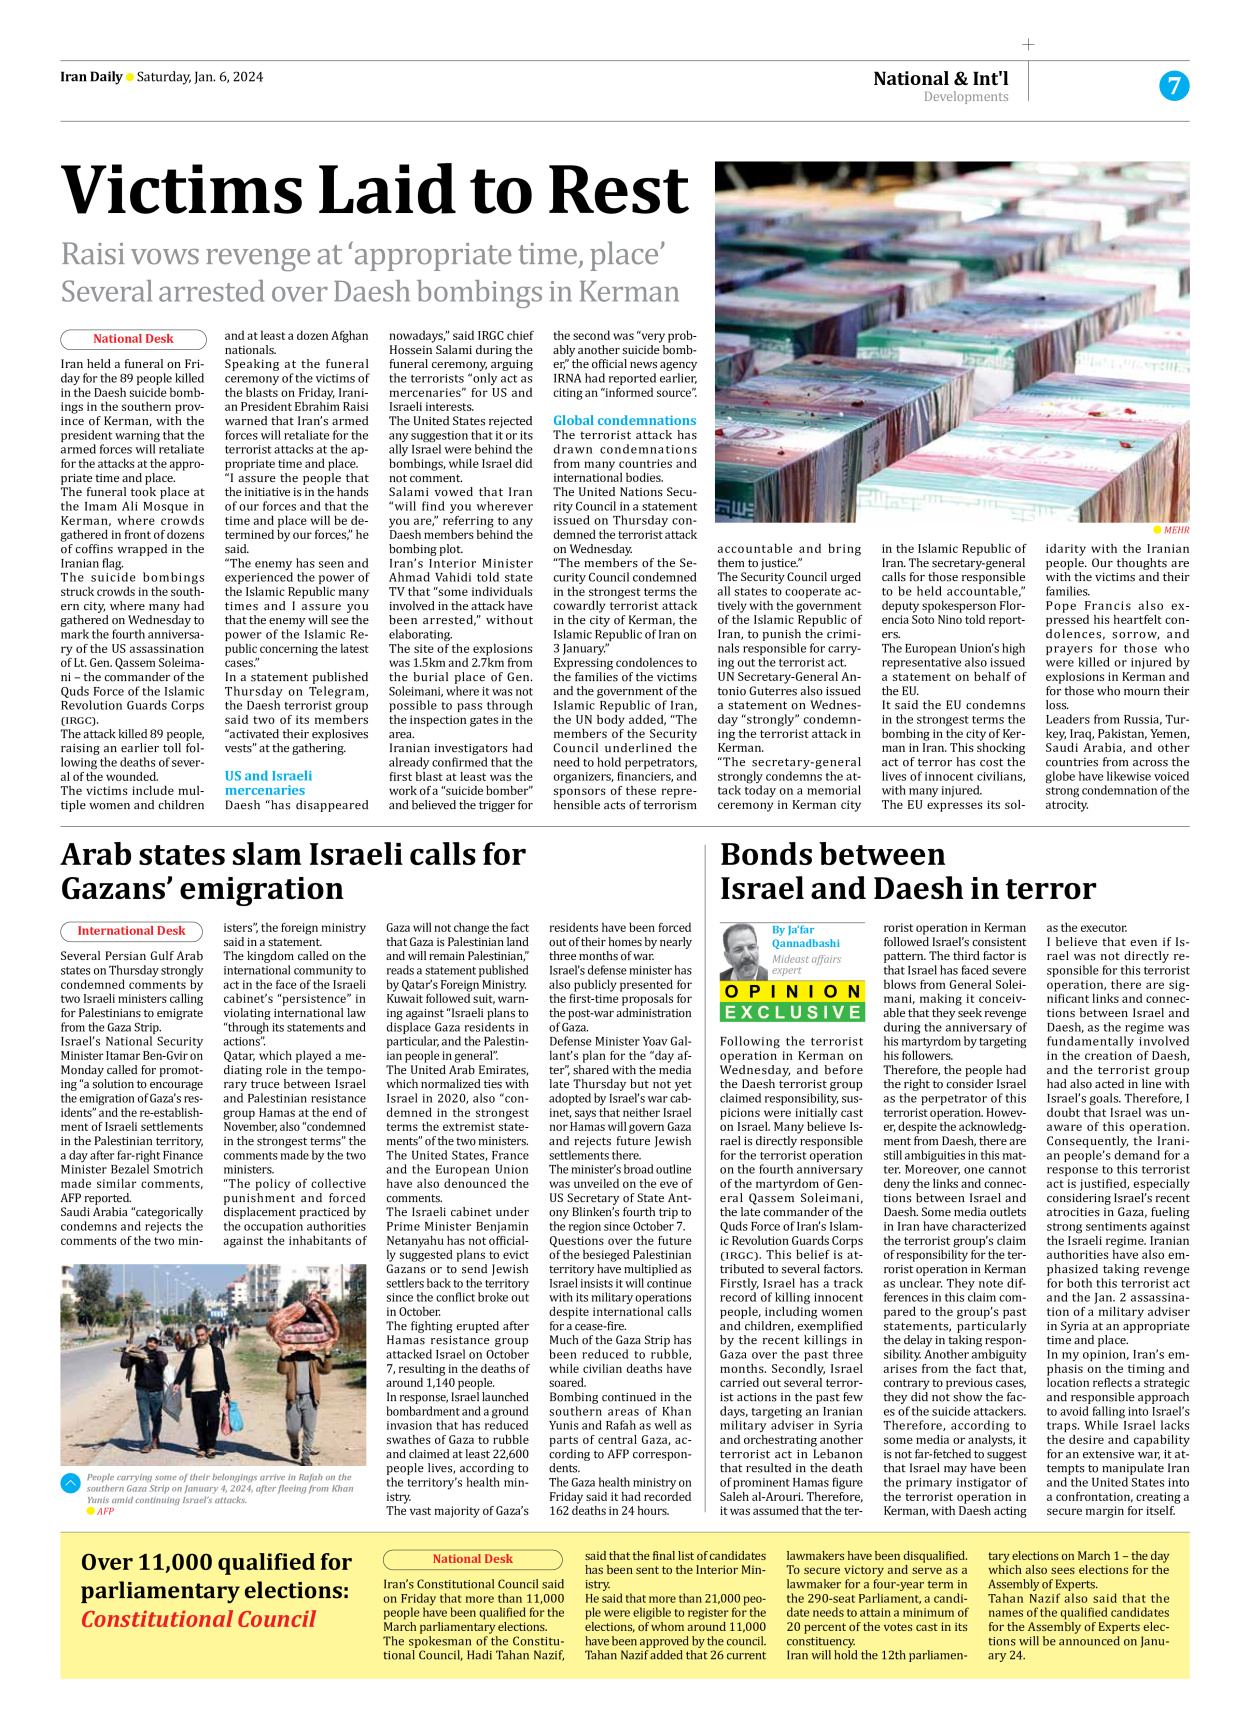 Iran Daily - Number Seven Thousand Four Hundred and Seventy Seven - 06 January 2024 - Page 7